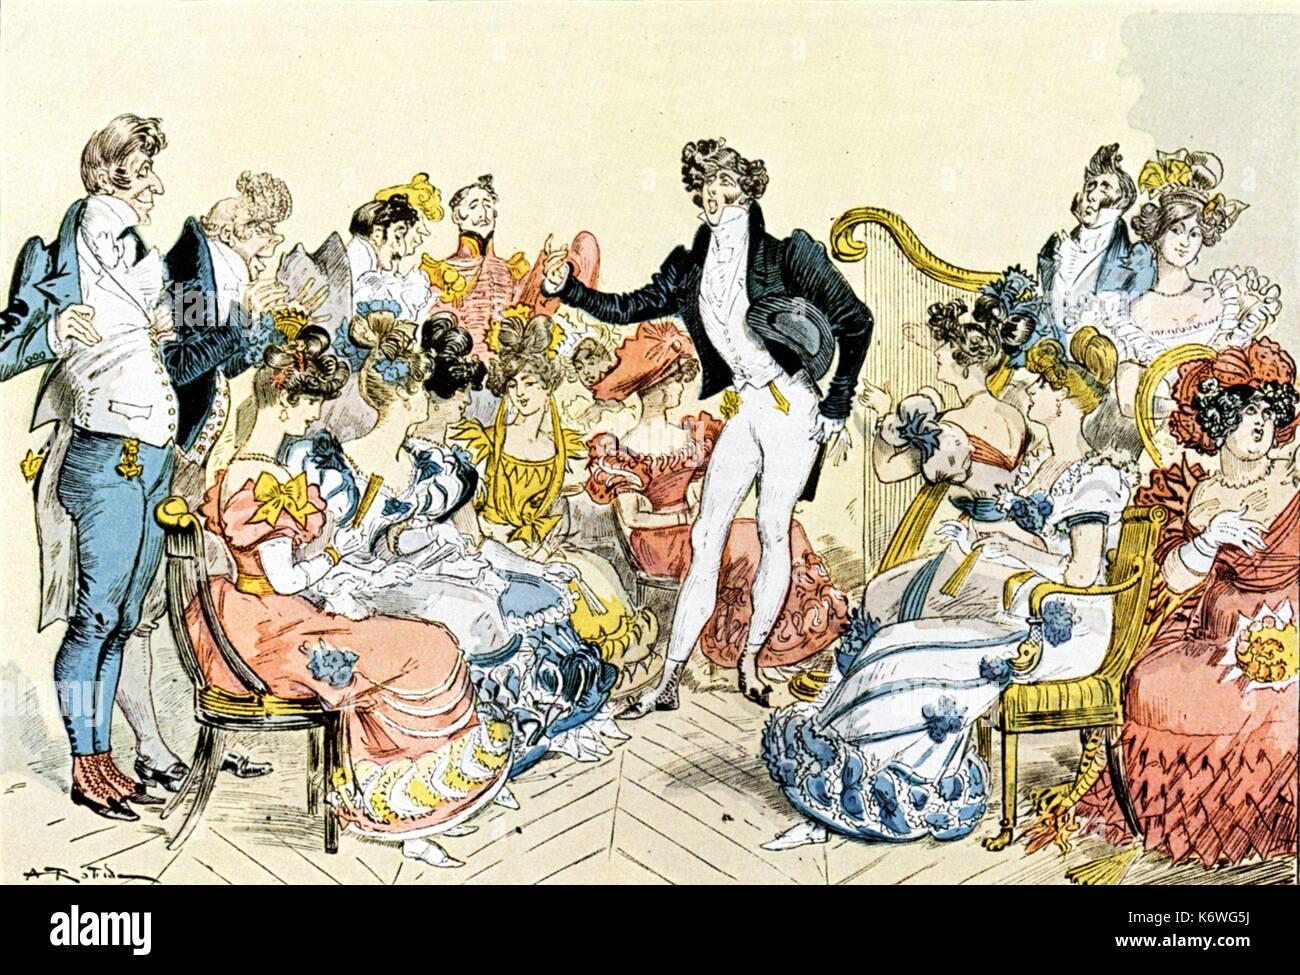 German Man singing at musical evening / soirée. Accompanied by harpist. High society, men and women dressed up. Late Classical/Early Romantic. Audience Stock Photo